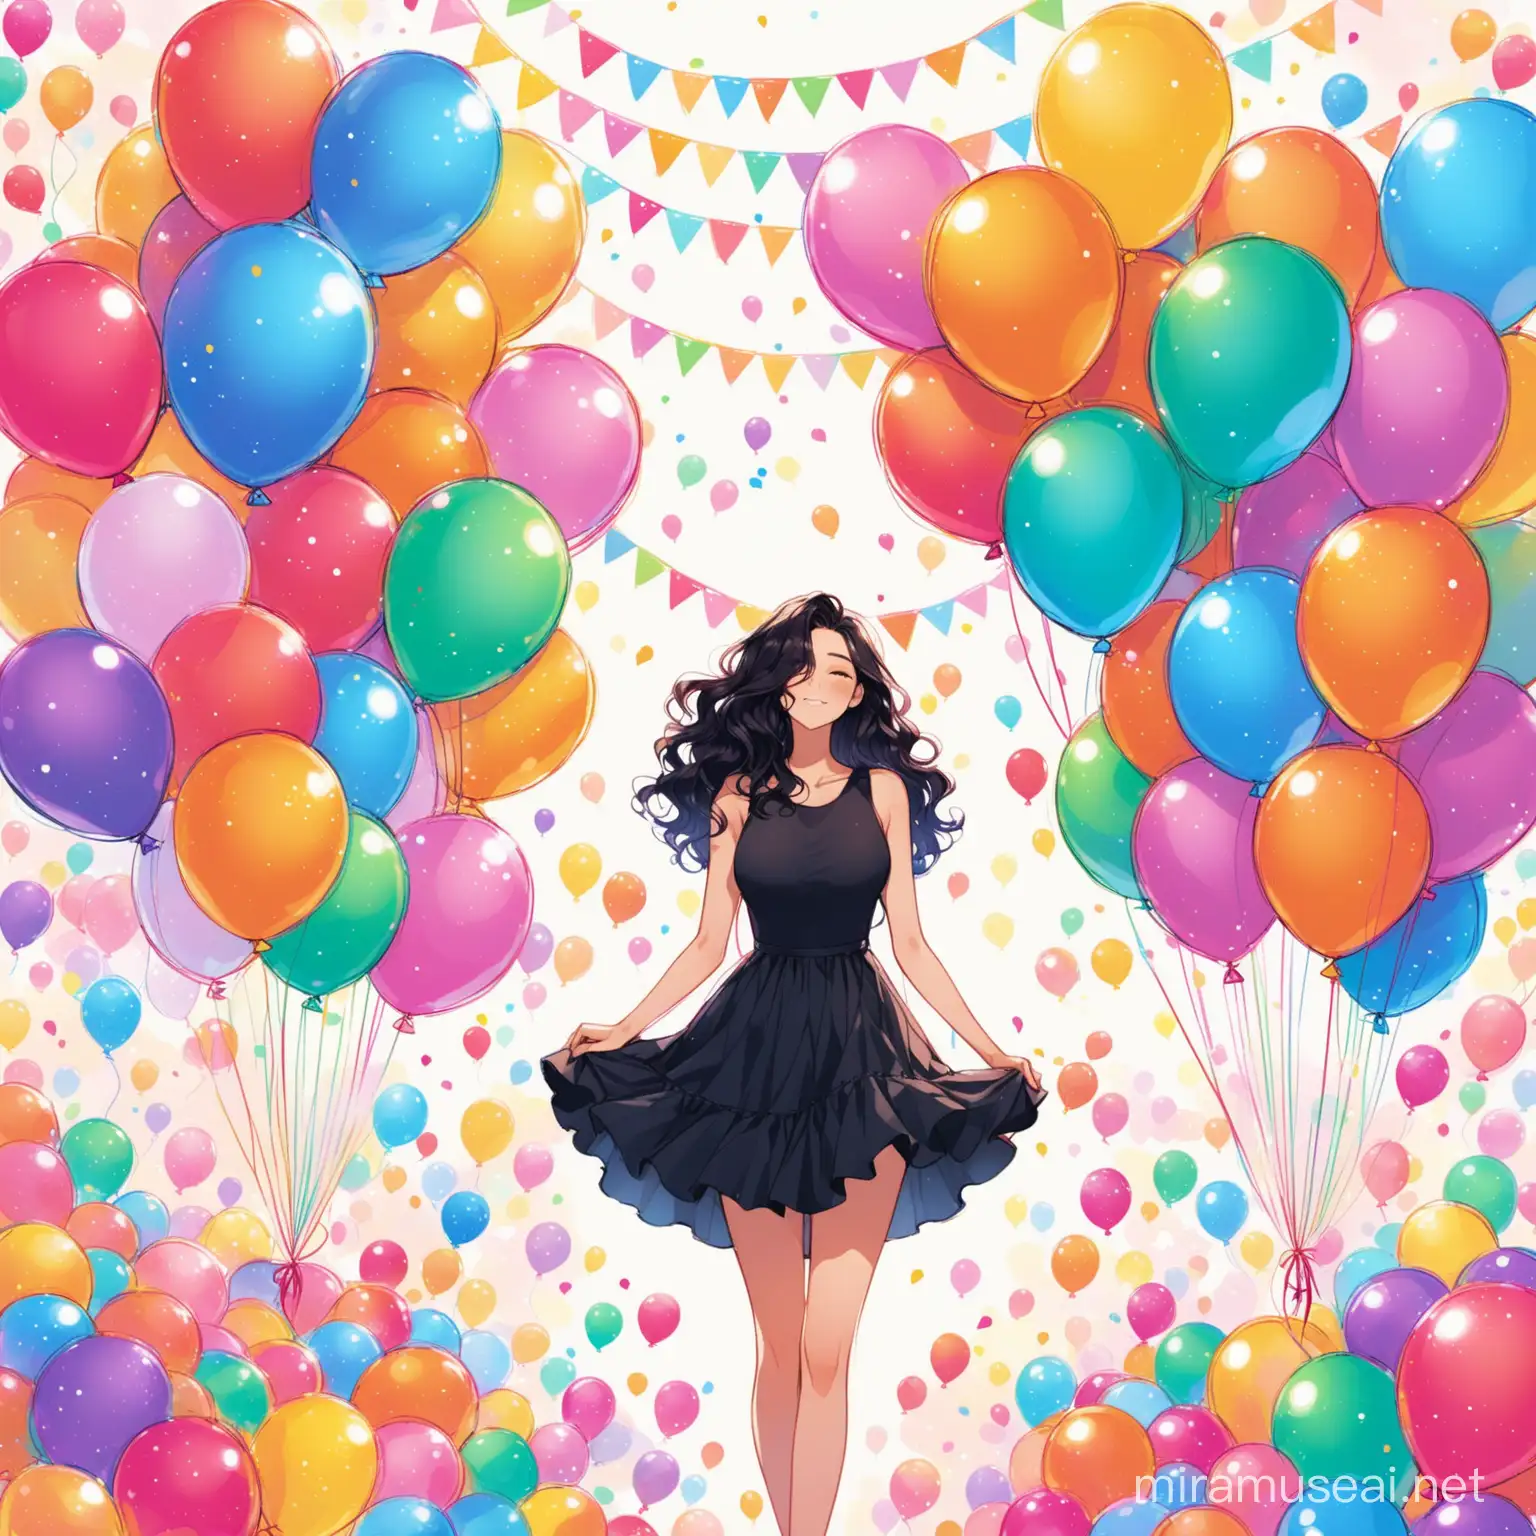 Tall women with dark wavey hair has a birthday, lots of balloons and flowers 